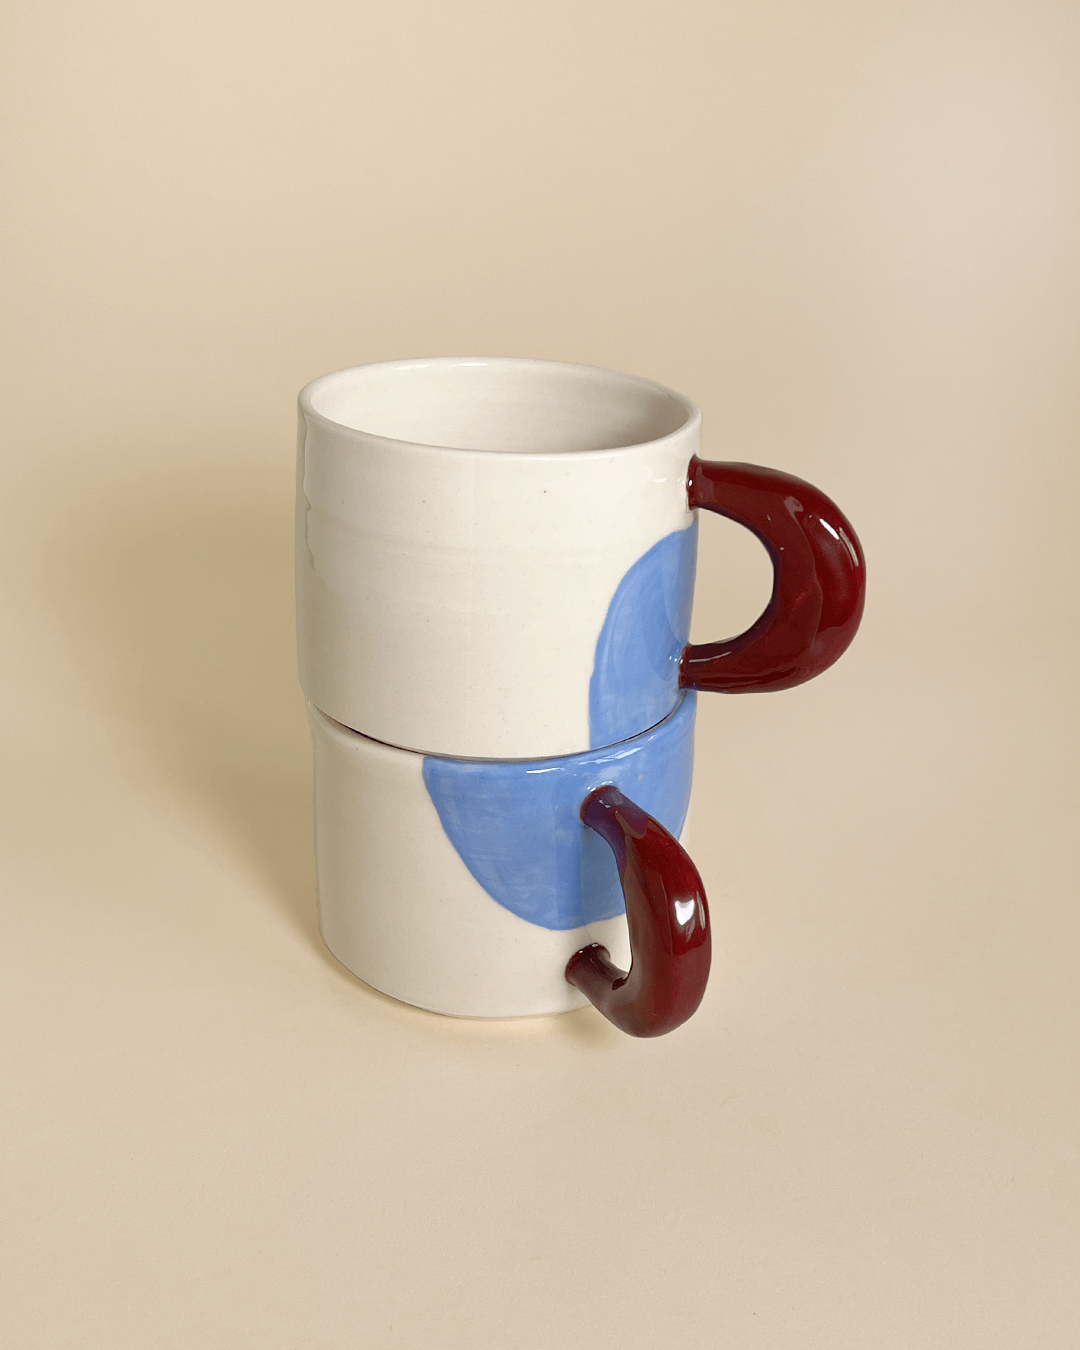 This chunky ceramic mug by Laura Liza has a wheel thrown body and a hand-sculpted handle with contrasting color combinations. The mug is perfect for a cup of coffee, a creamy matcha, a tea or a sweet hot chocolate, whatever you prefer. The ceramic mug fits perfectly with the dotted ceramic plate and highlights a fine breakfast table.